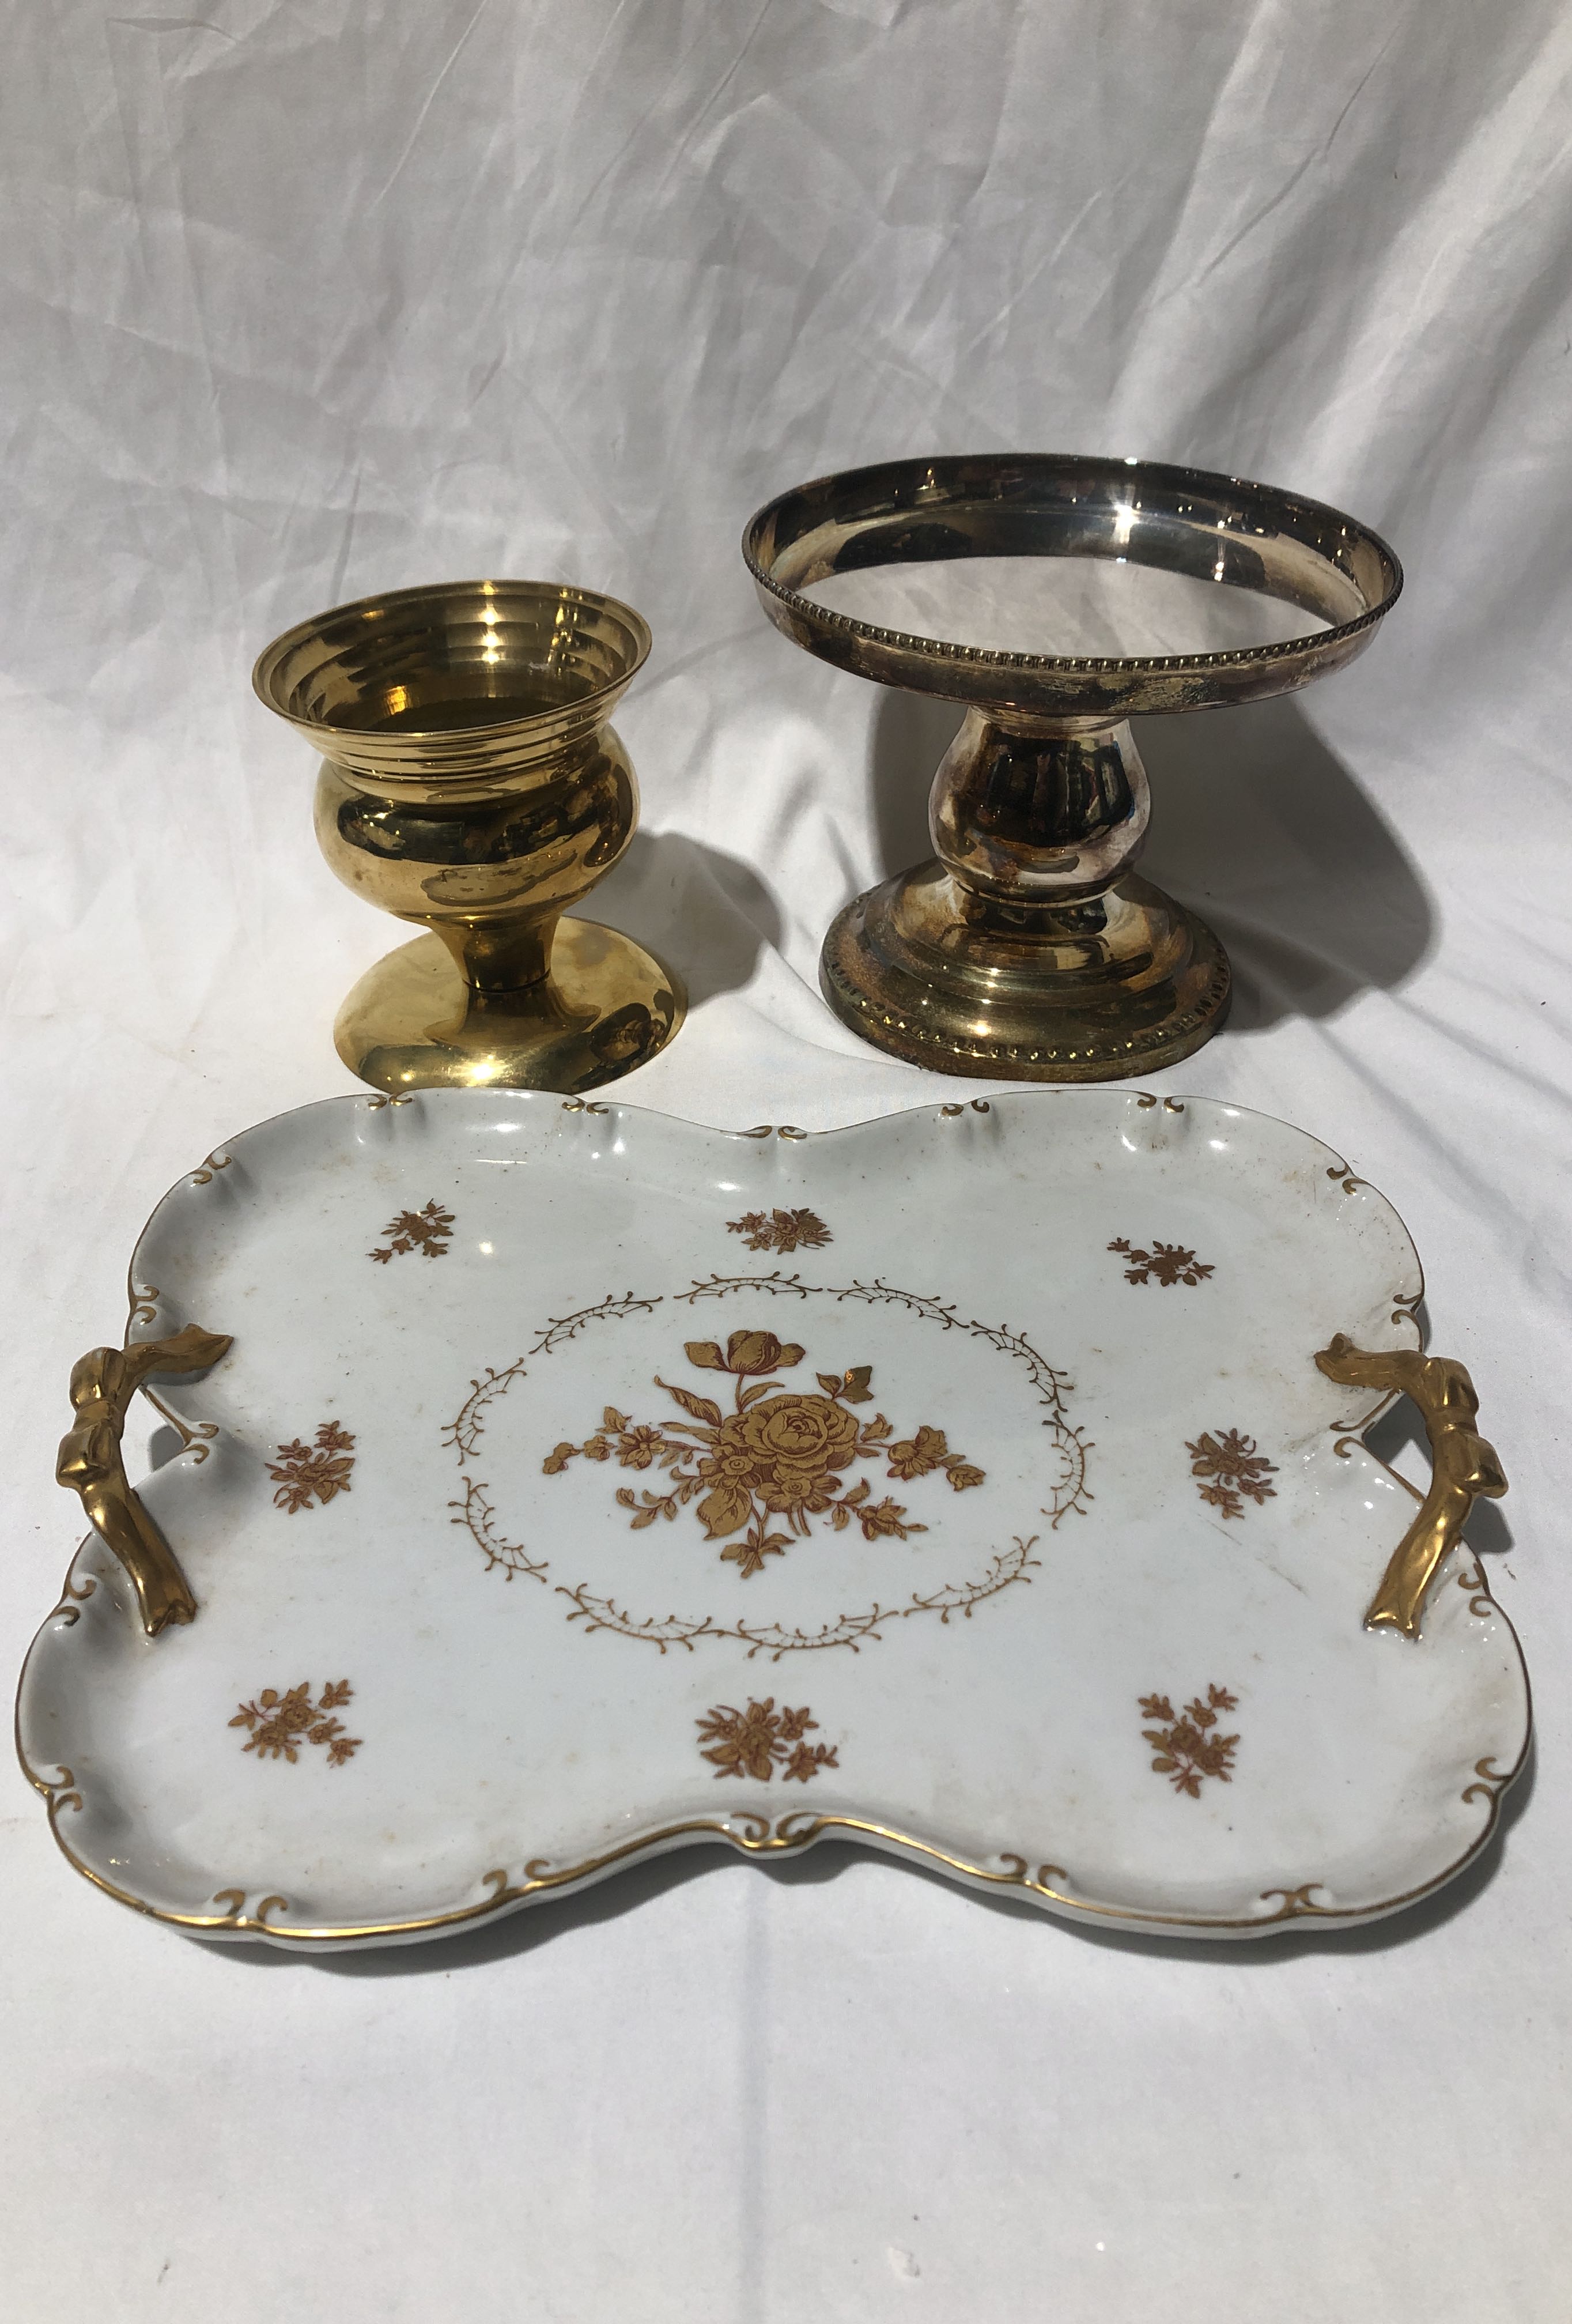 Vintage Brass Decor/items Sold Separately 